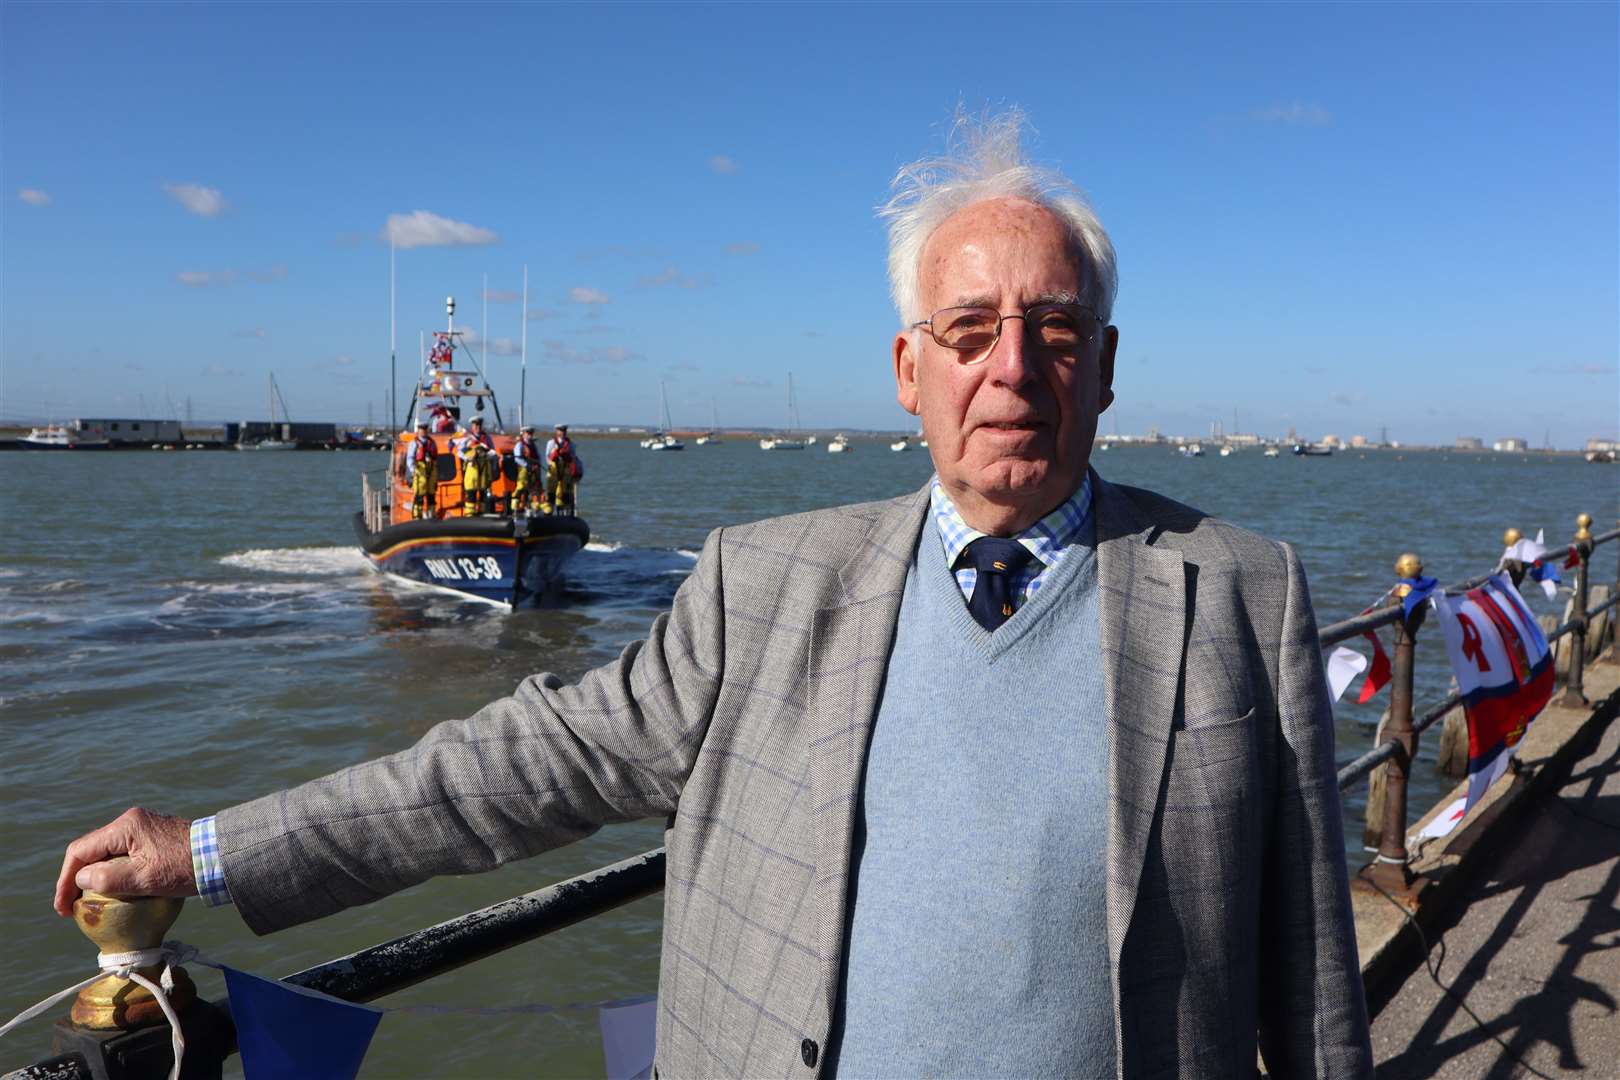 Anthony Copping Joyce officially named Sheppey's new RNLI lifeboat the Judith Copping Joyce in a ceremony at Crundall's Wharf, Queenborough, on Saturday